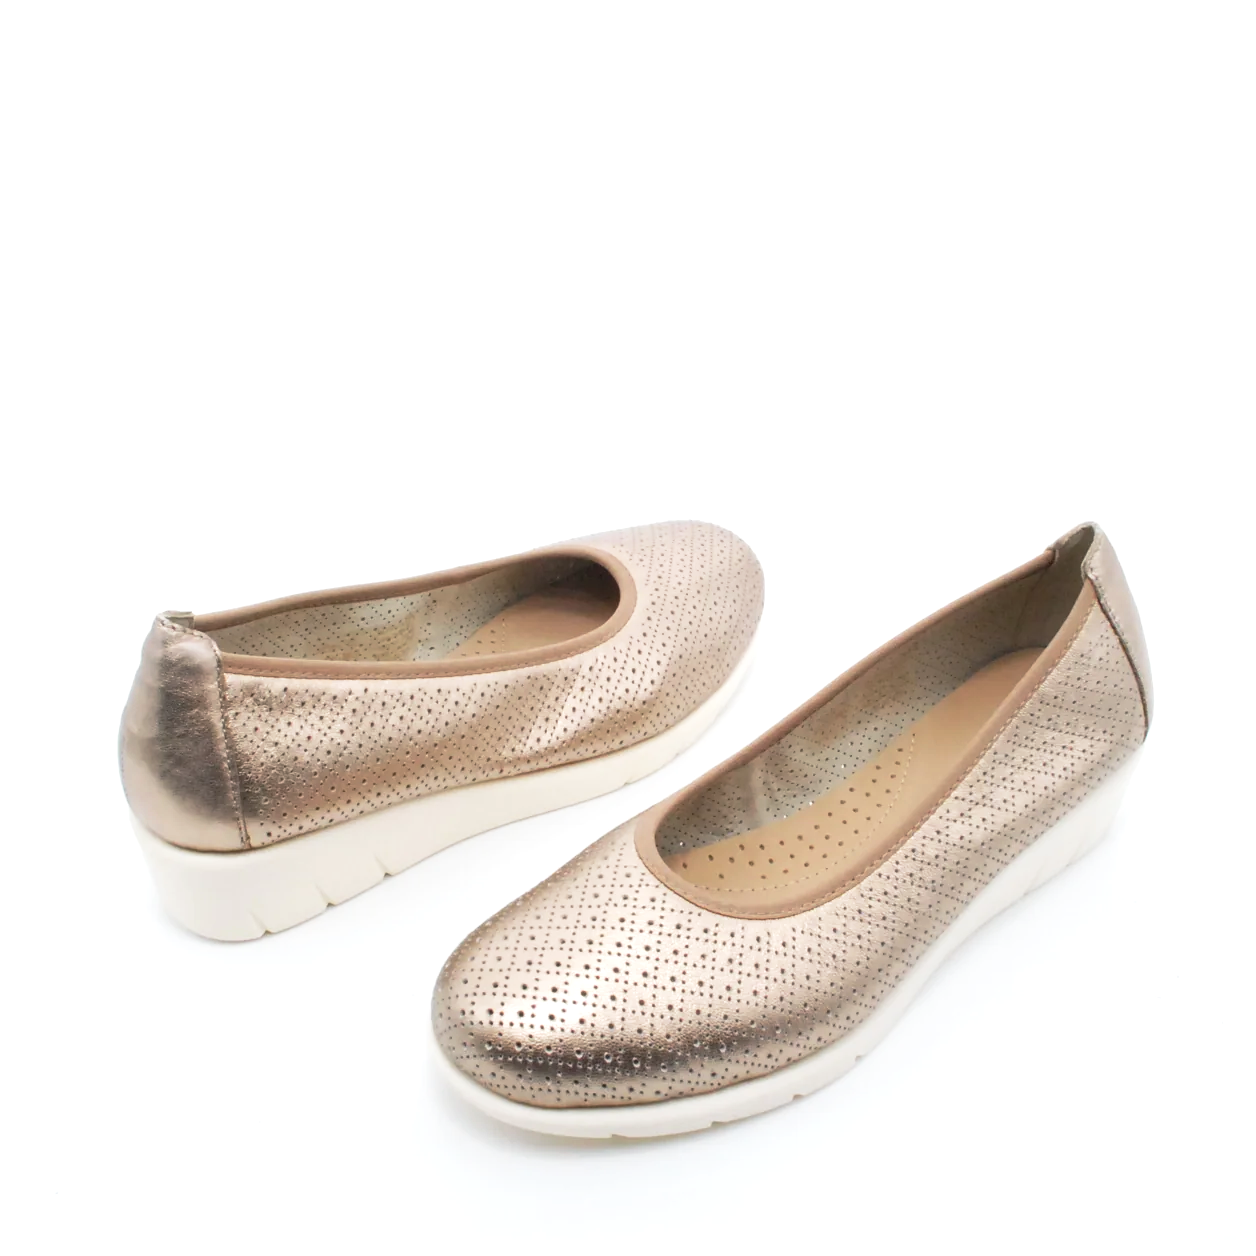 ballerina-riposella-in-pelle-comfort-2_7a0557dc-a88d-4255-95d6-53c741a93a30.png